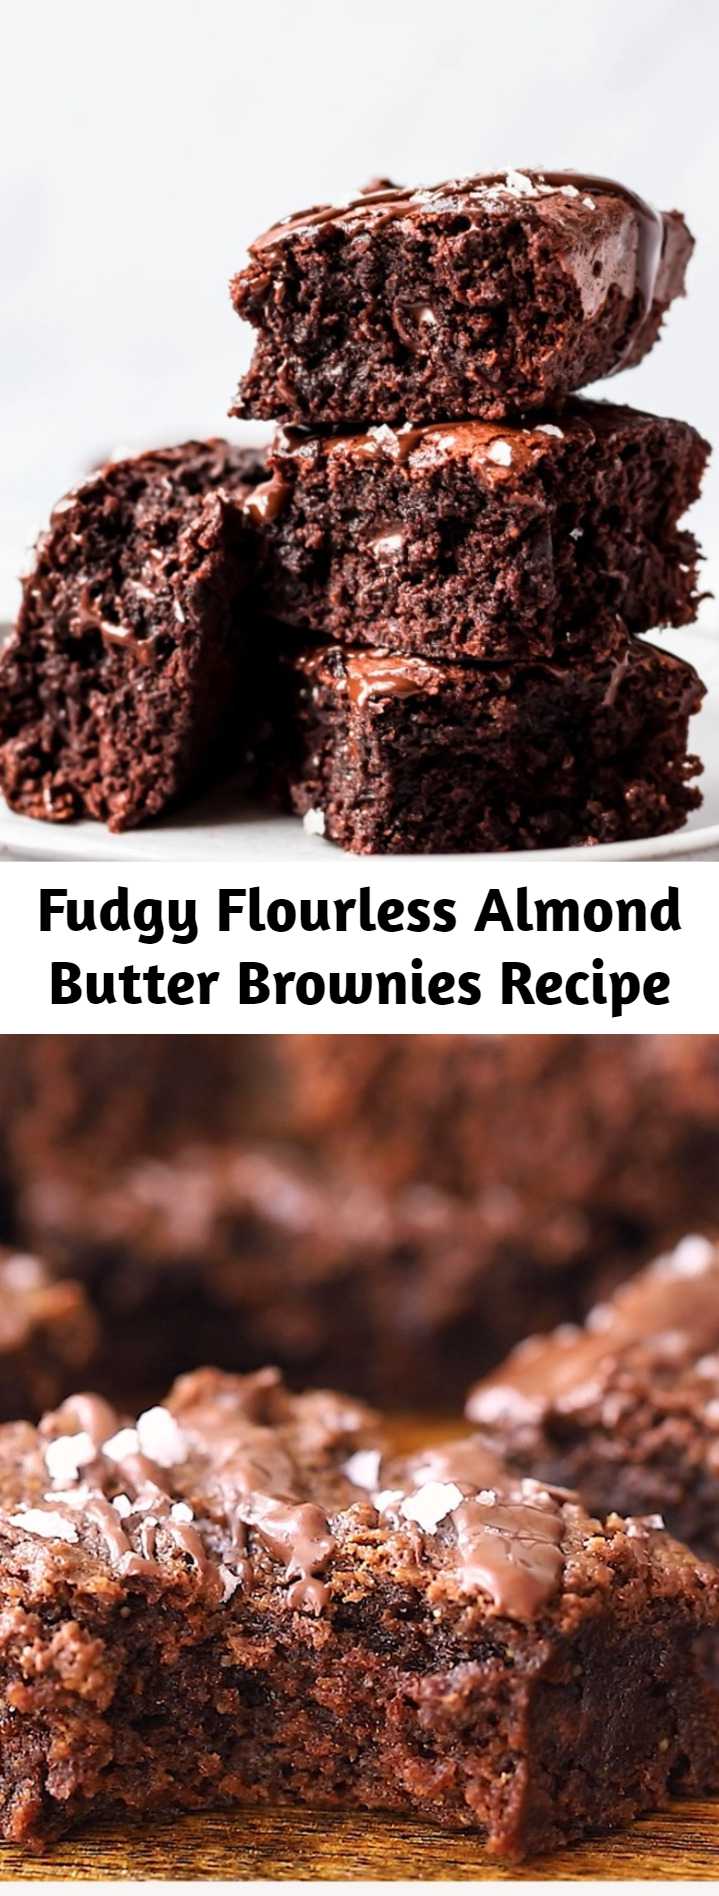 Fudgy Flourless Almond Butter Brownies Recipe (Gluten Free + Dairy Free) - One of the best gluten free brownie recipes on the internet. Fudgy, flourless almond butter brownies made with simple ingredients like natural creamy almond butter, pure maple syrup, cocoa powder and chocolate chips. Incredible hot from the oven or even straight from the fridge! #glutenfree #brownies #dessert #healthydessert #grainfree #dairyfree #chocolate #chocolaterecipe #baking